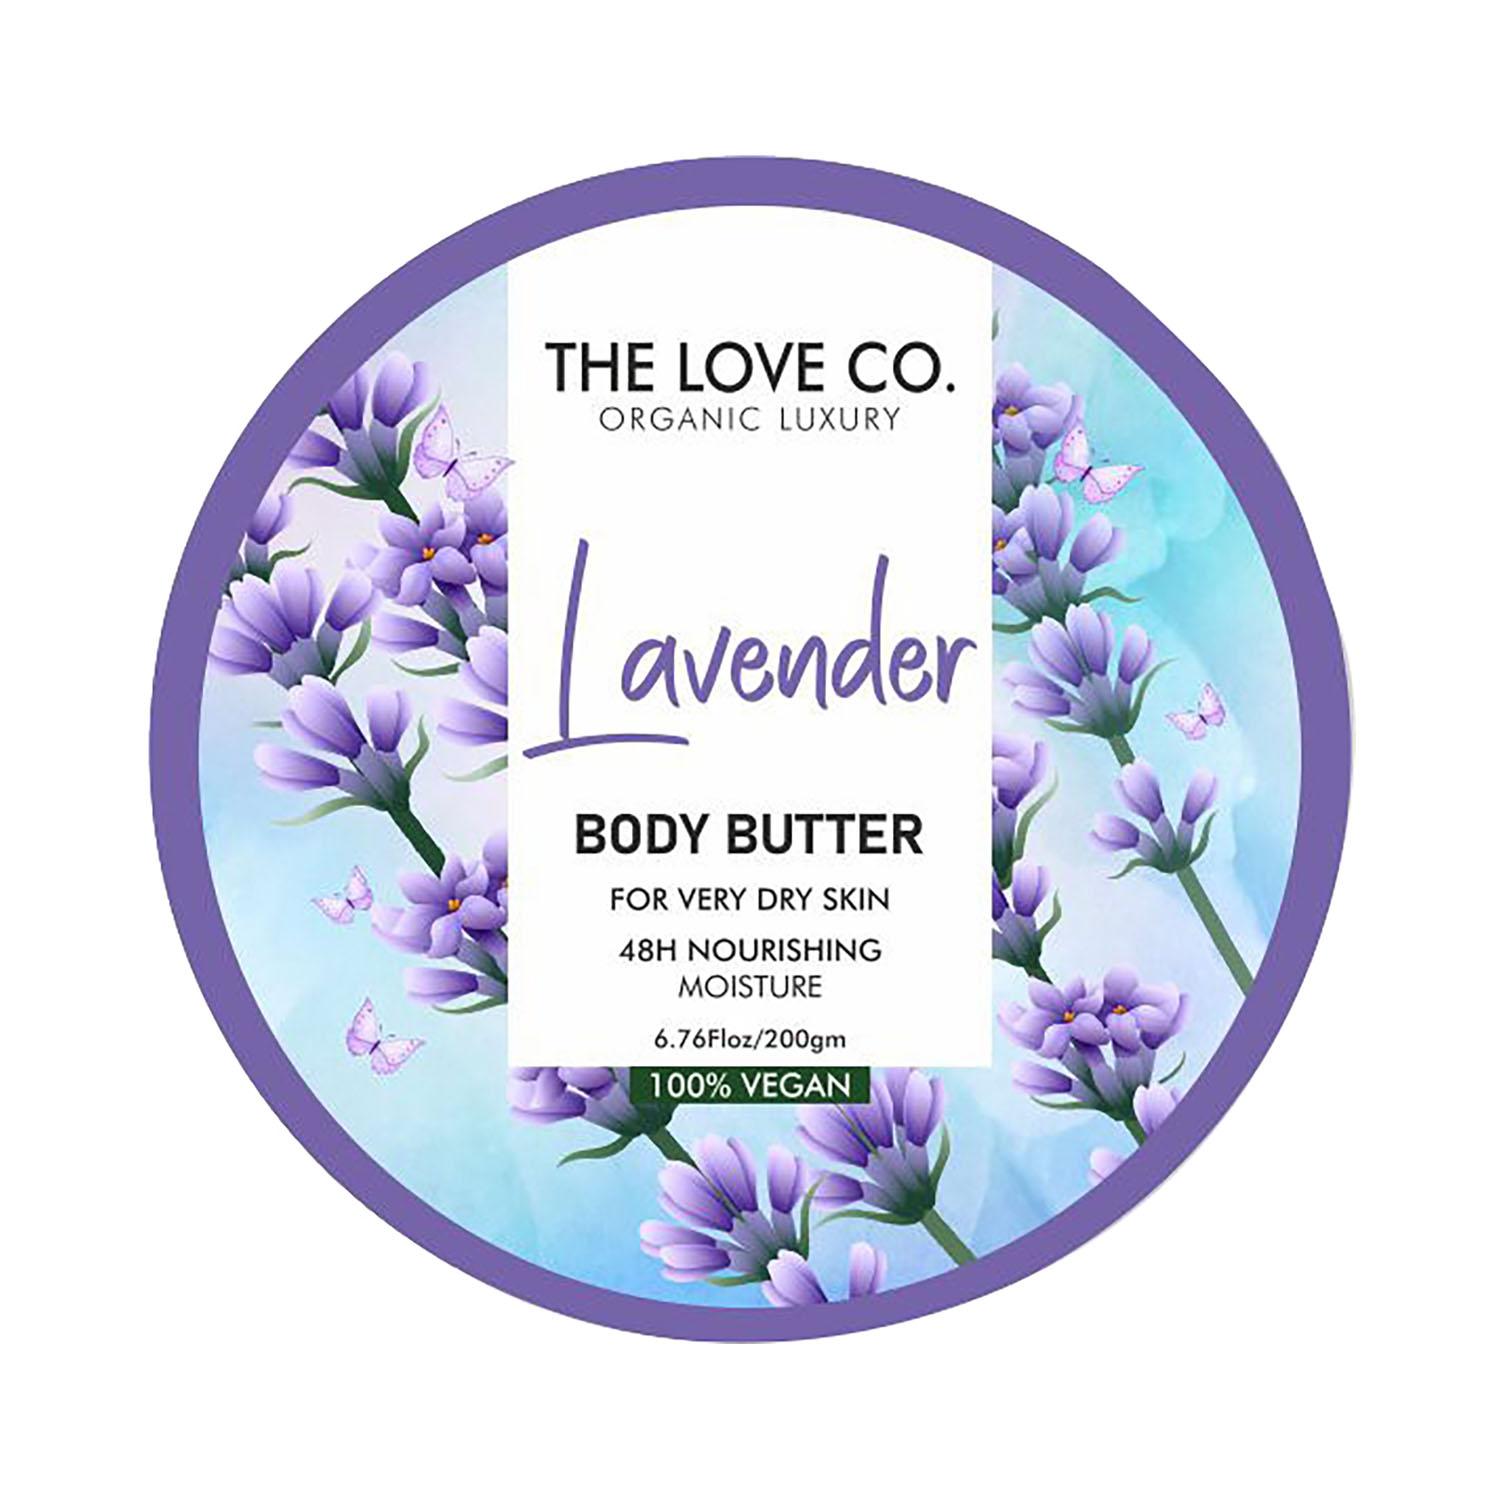 THE LOVE CO. | THE LOVE CO. Lavender Body Butter Deep Moisturization With Pure Shea Butter (200g)